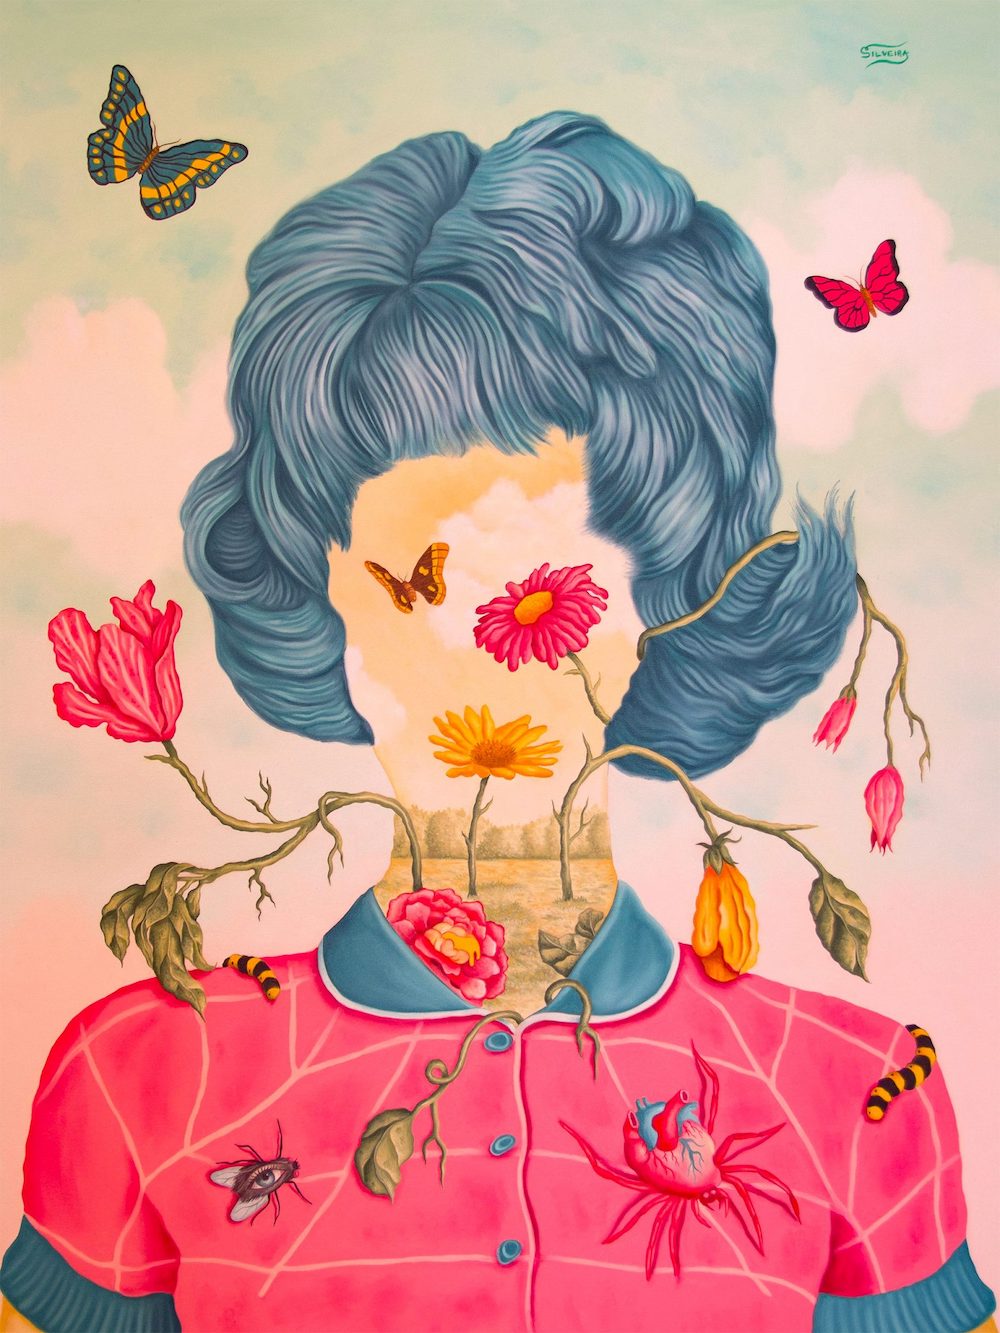 Rafael Silveira Blurs the Lines of Time in His Billowy Soft Dreamscapes Flower Painting